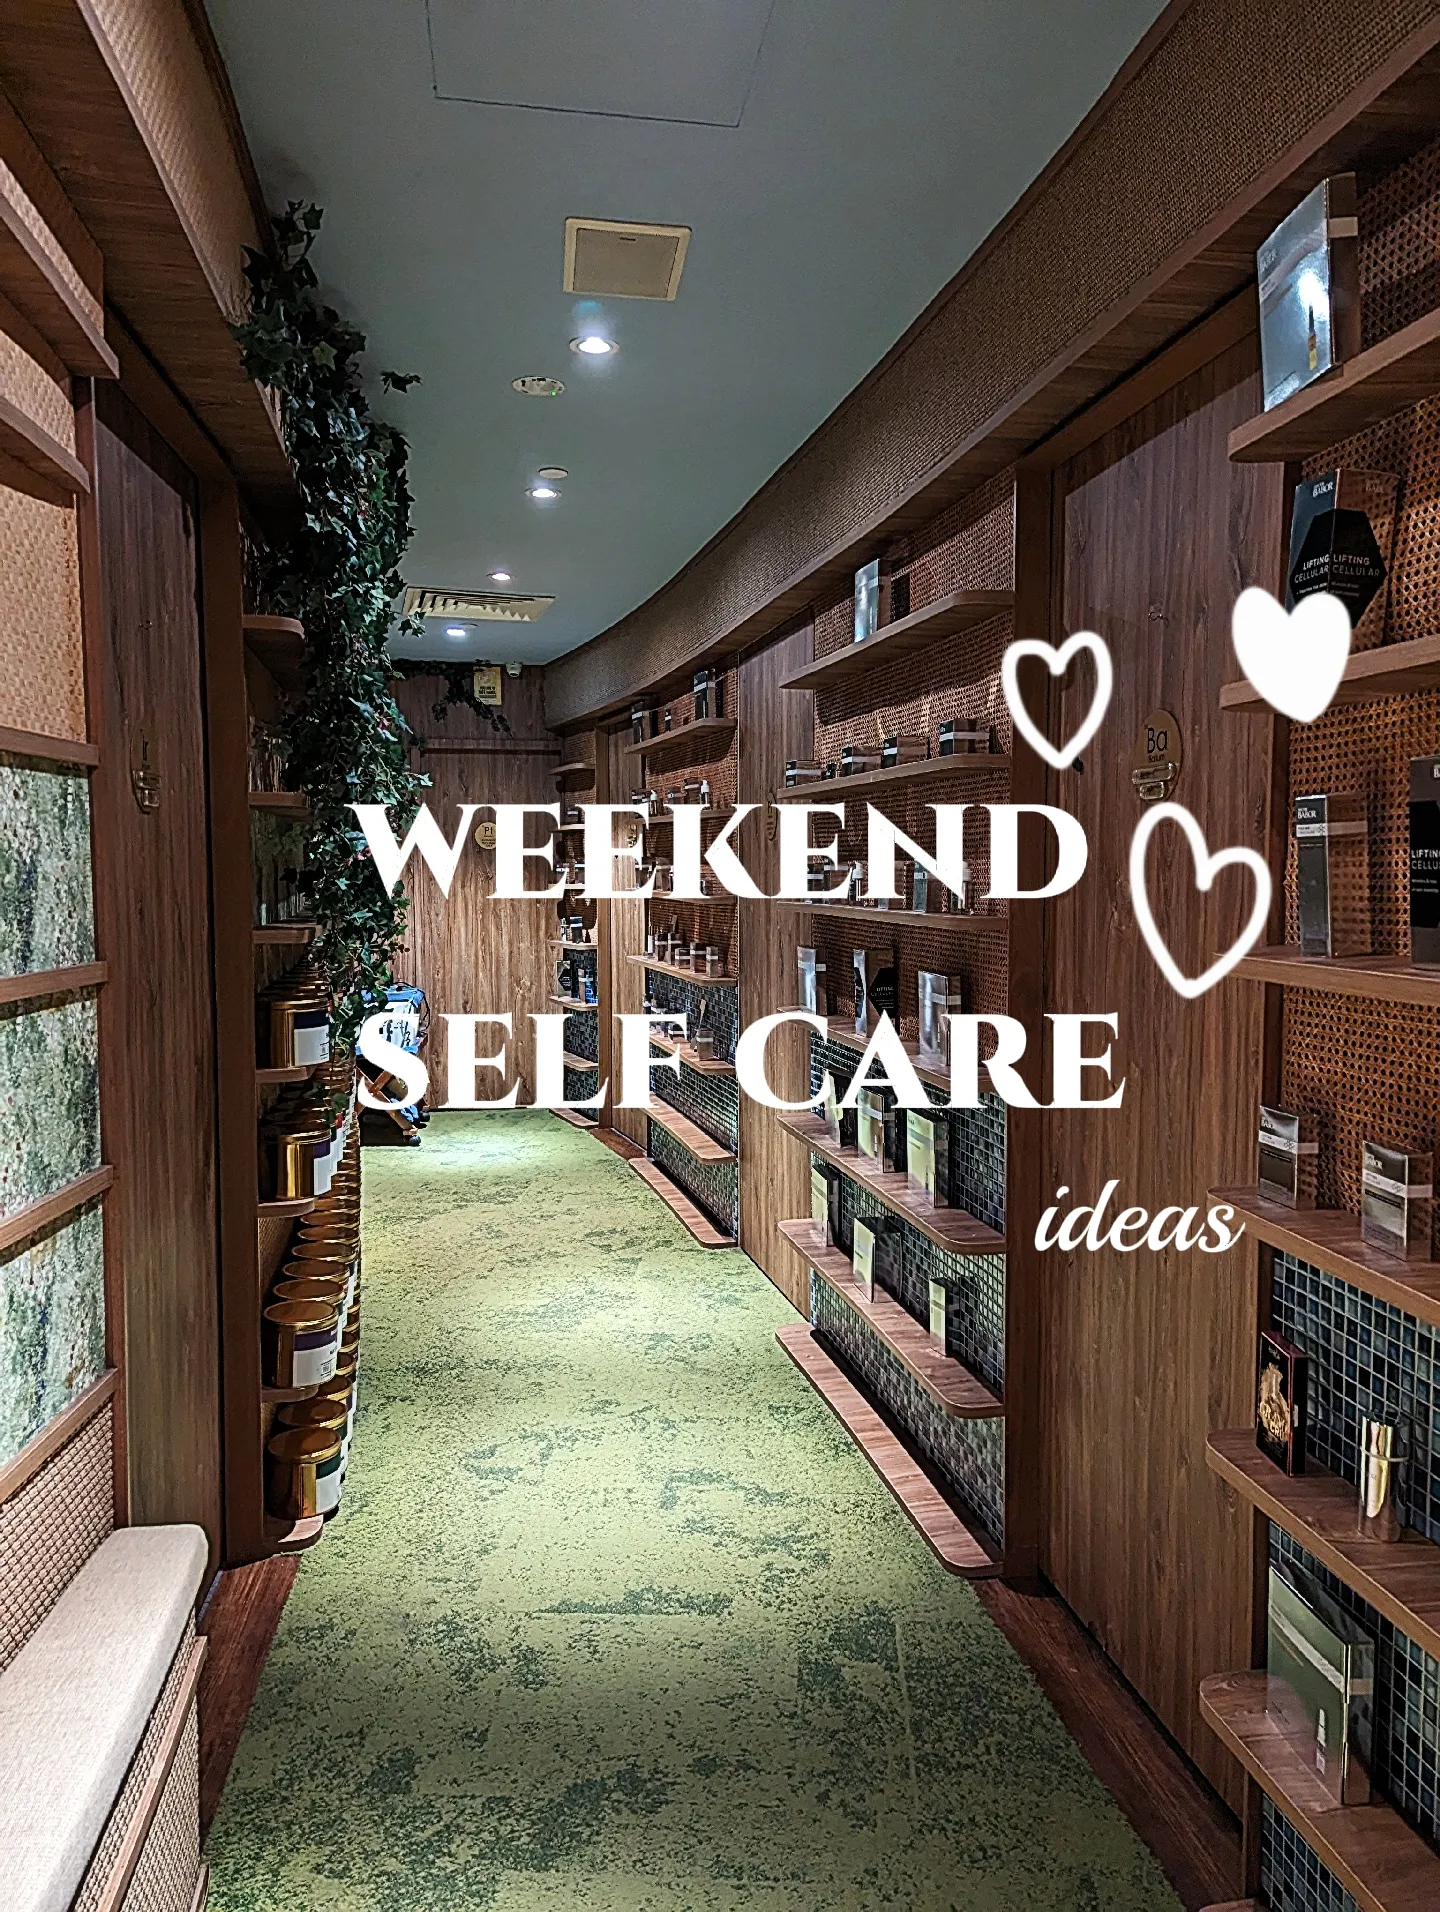 Self Care Activities in the Weekend's images(0)